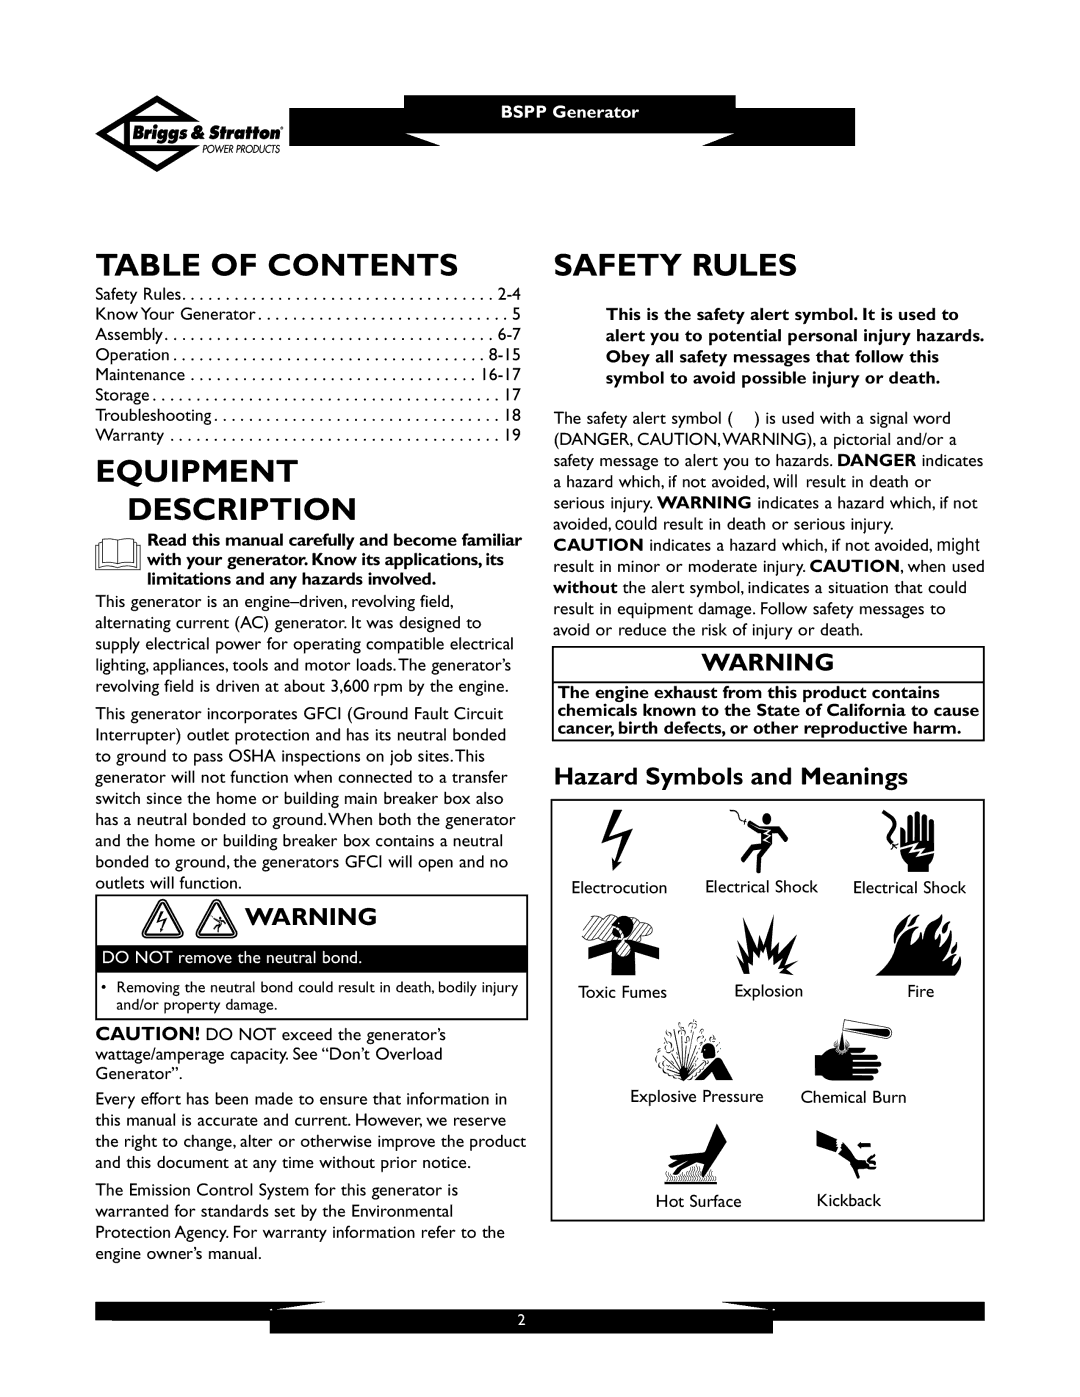 Briggs & Stratton PRO6500 owner manual Table of Contents, Equipment Description, Safety Rules 